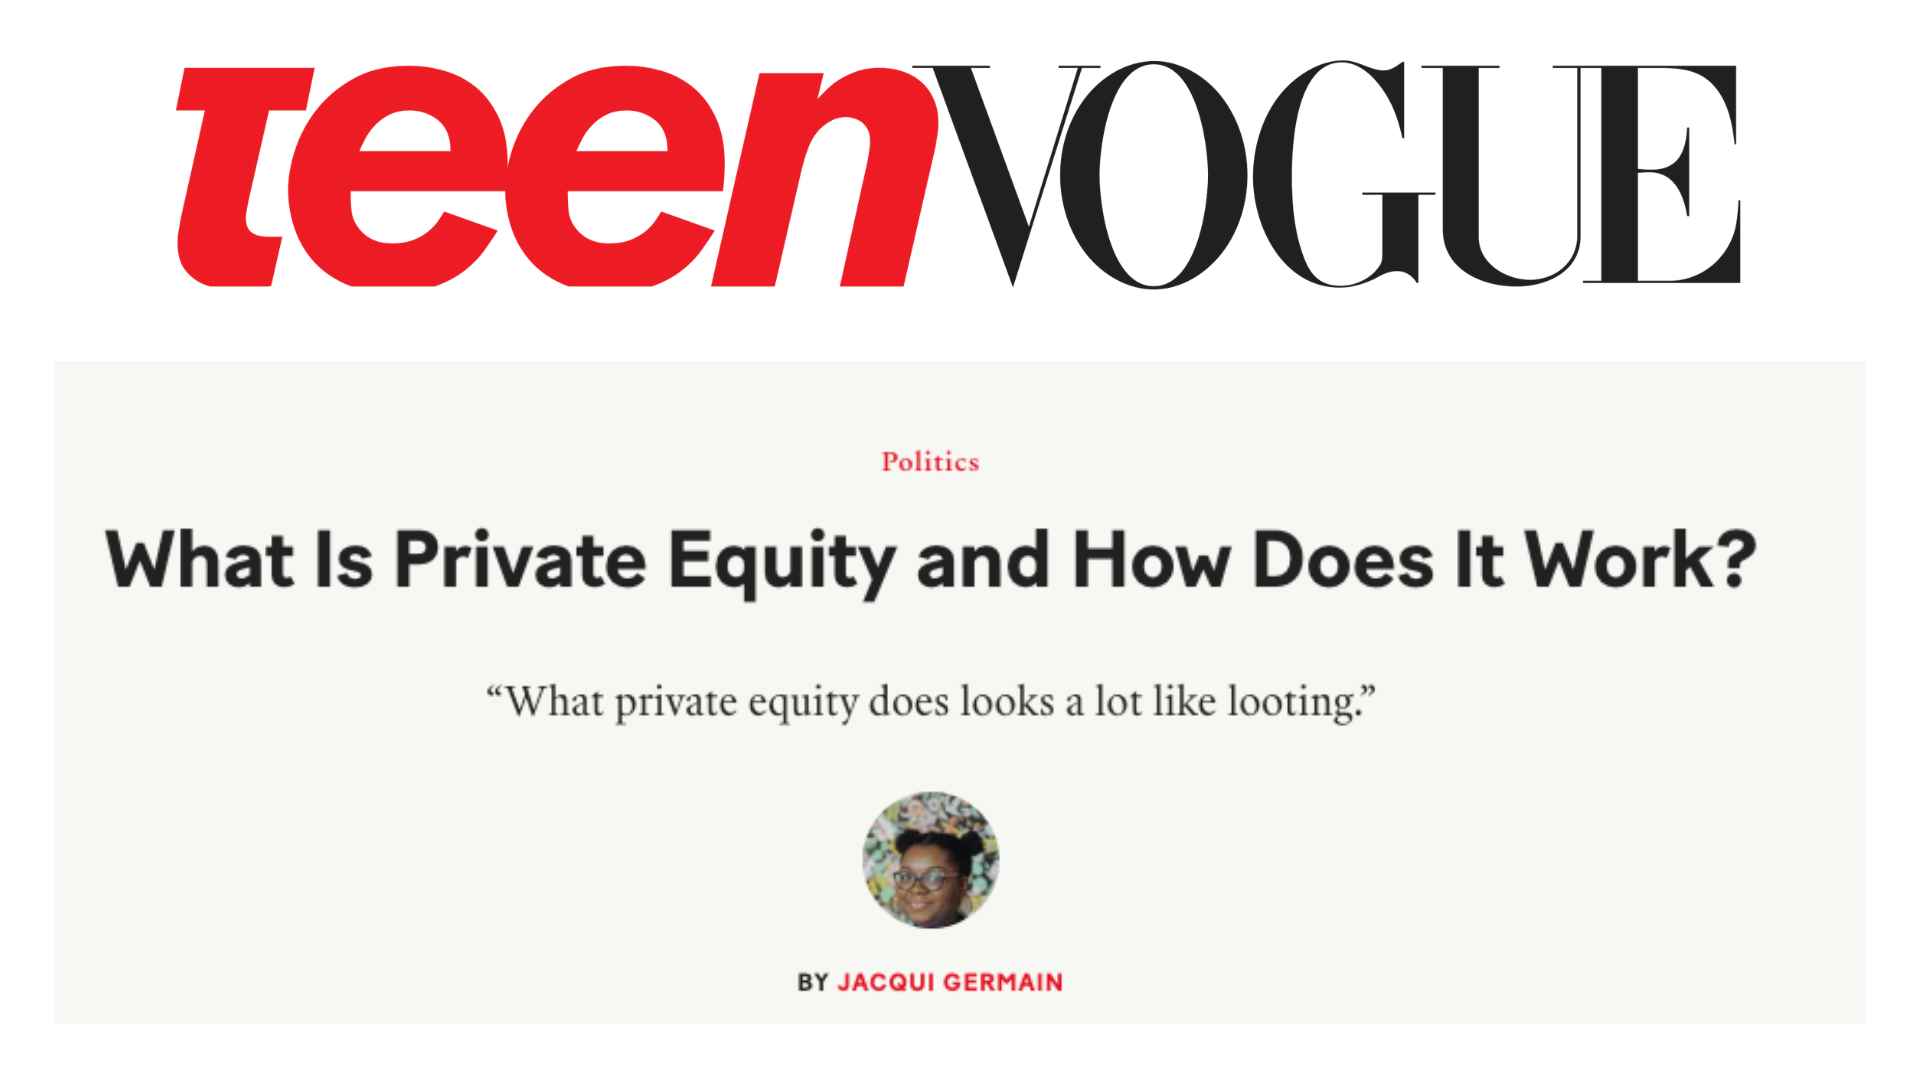 Teen Vogue : What Is Private Equity and How Does It Work?